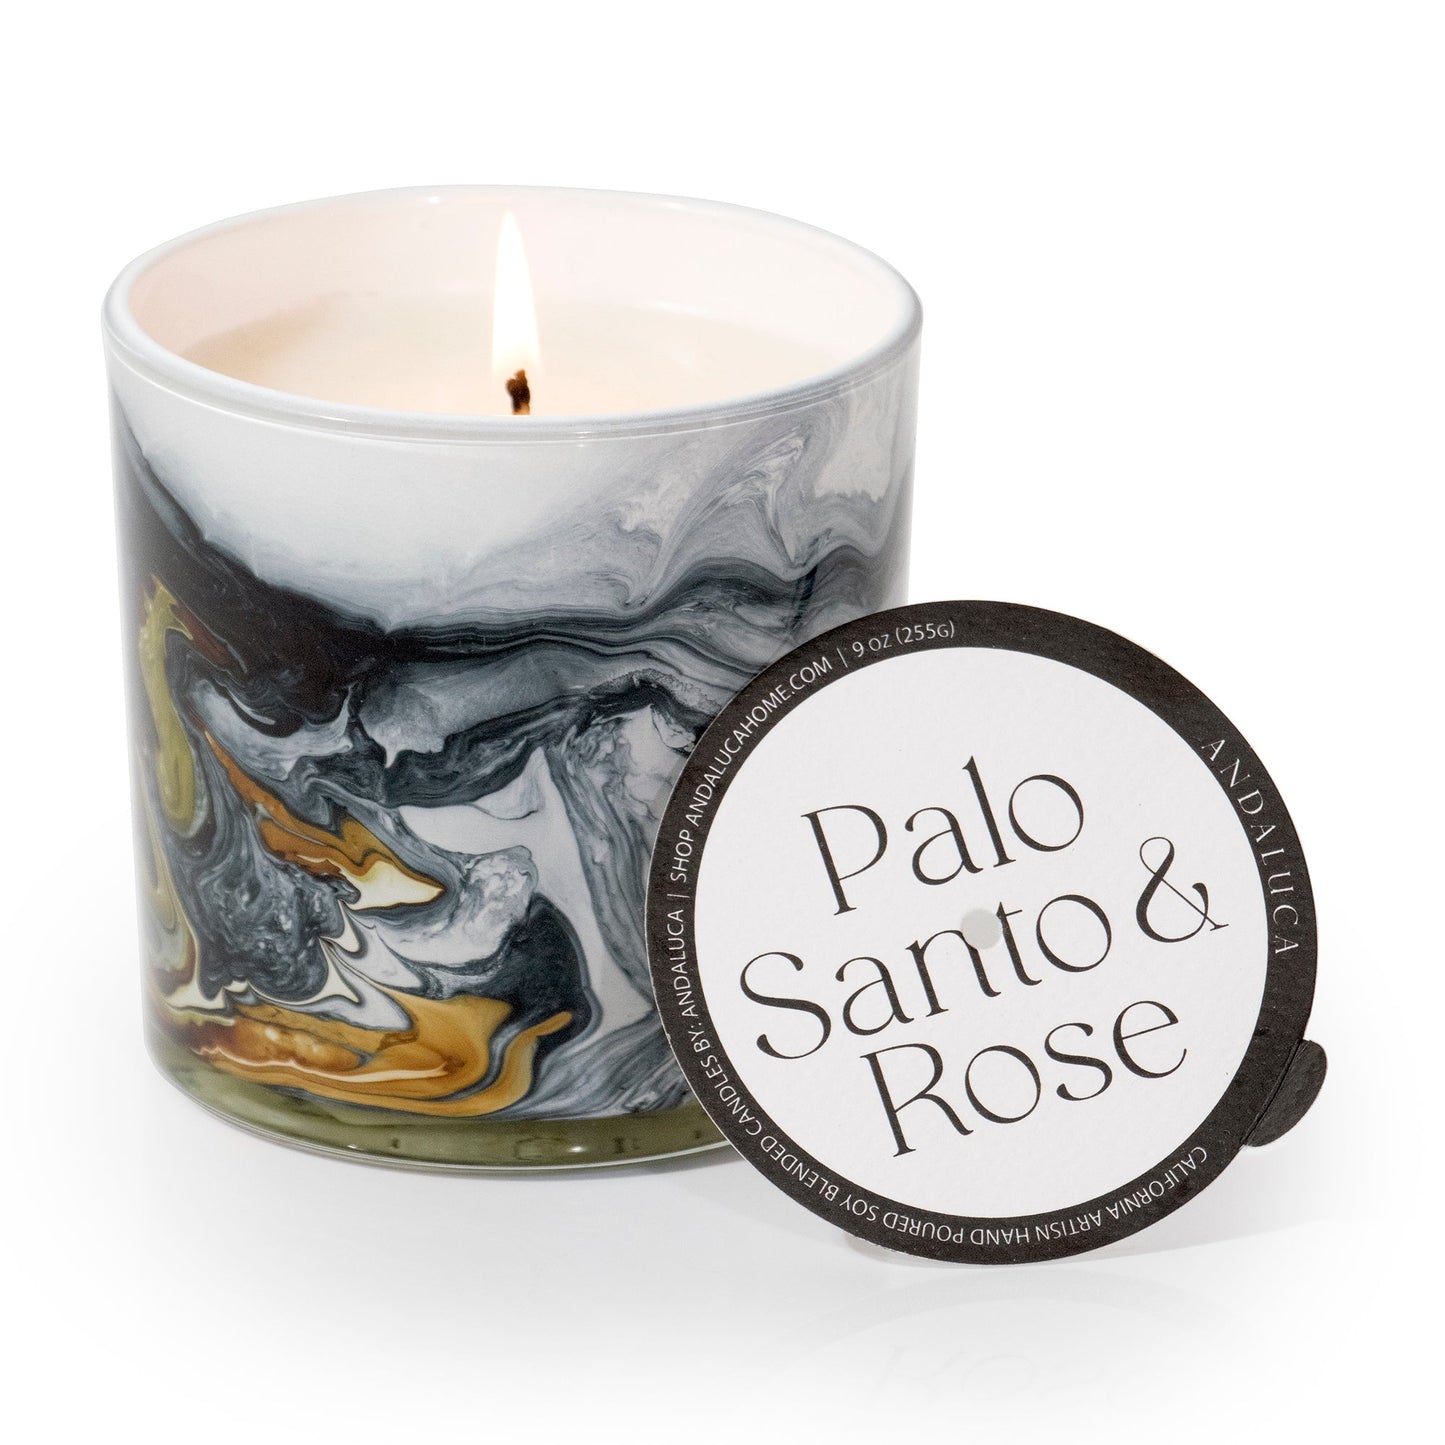 Palo Santo & Rose 9 oz. Swirl Glass Candle by Andaluca Home